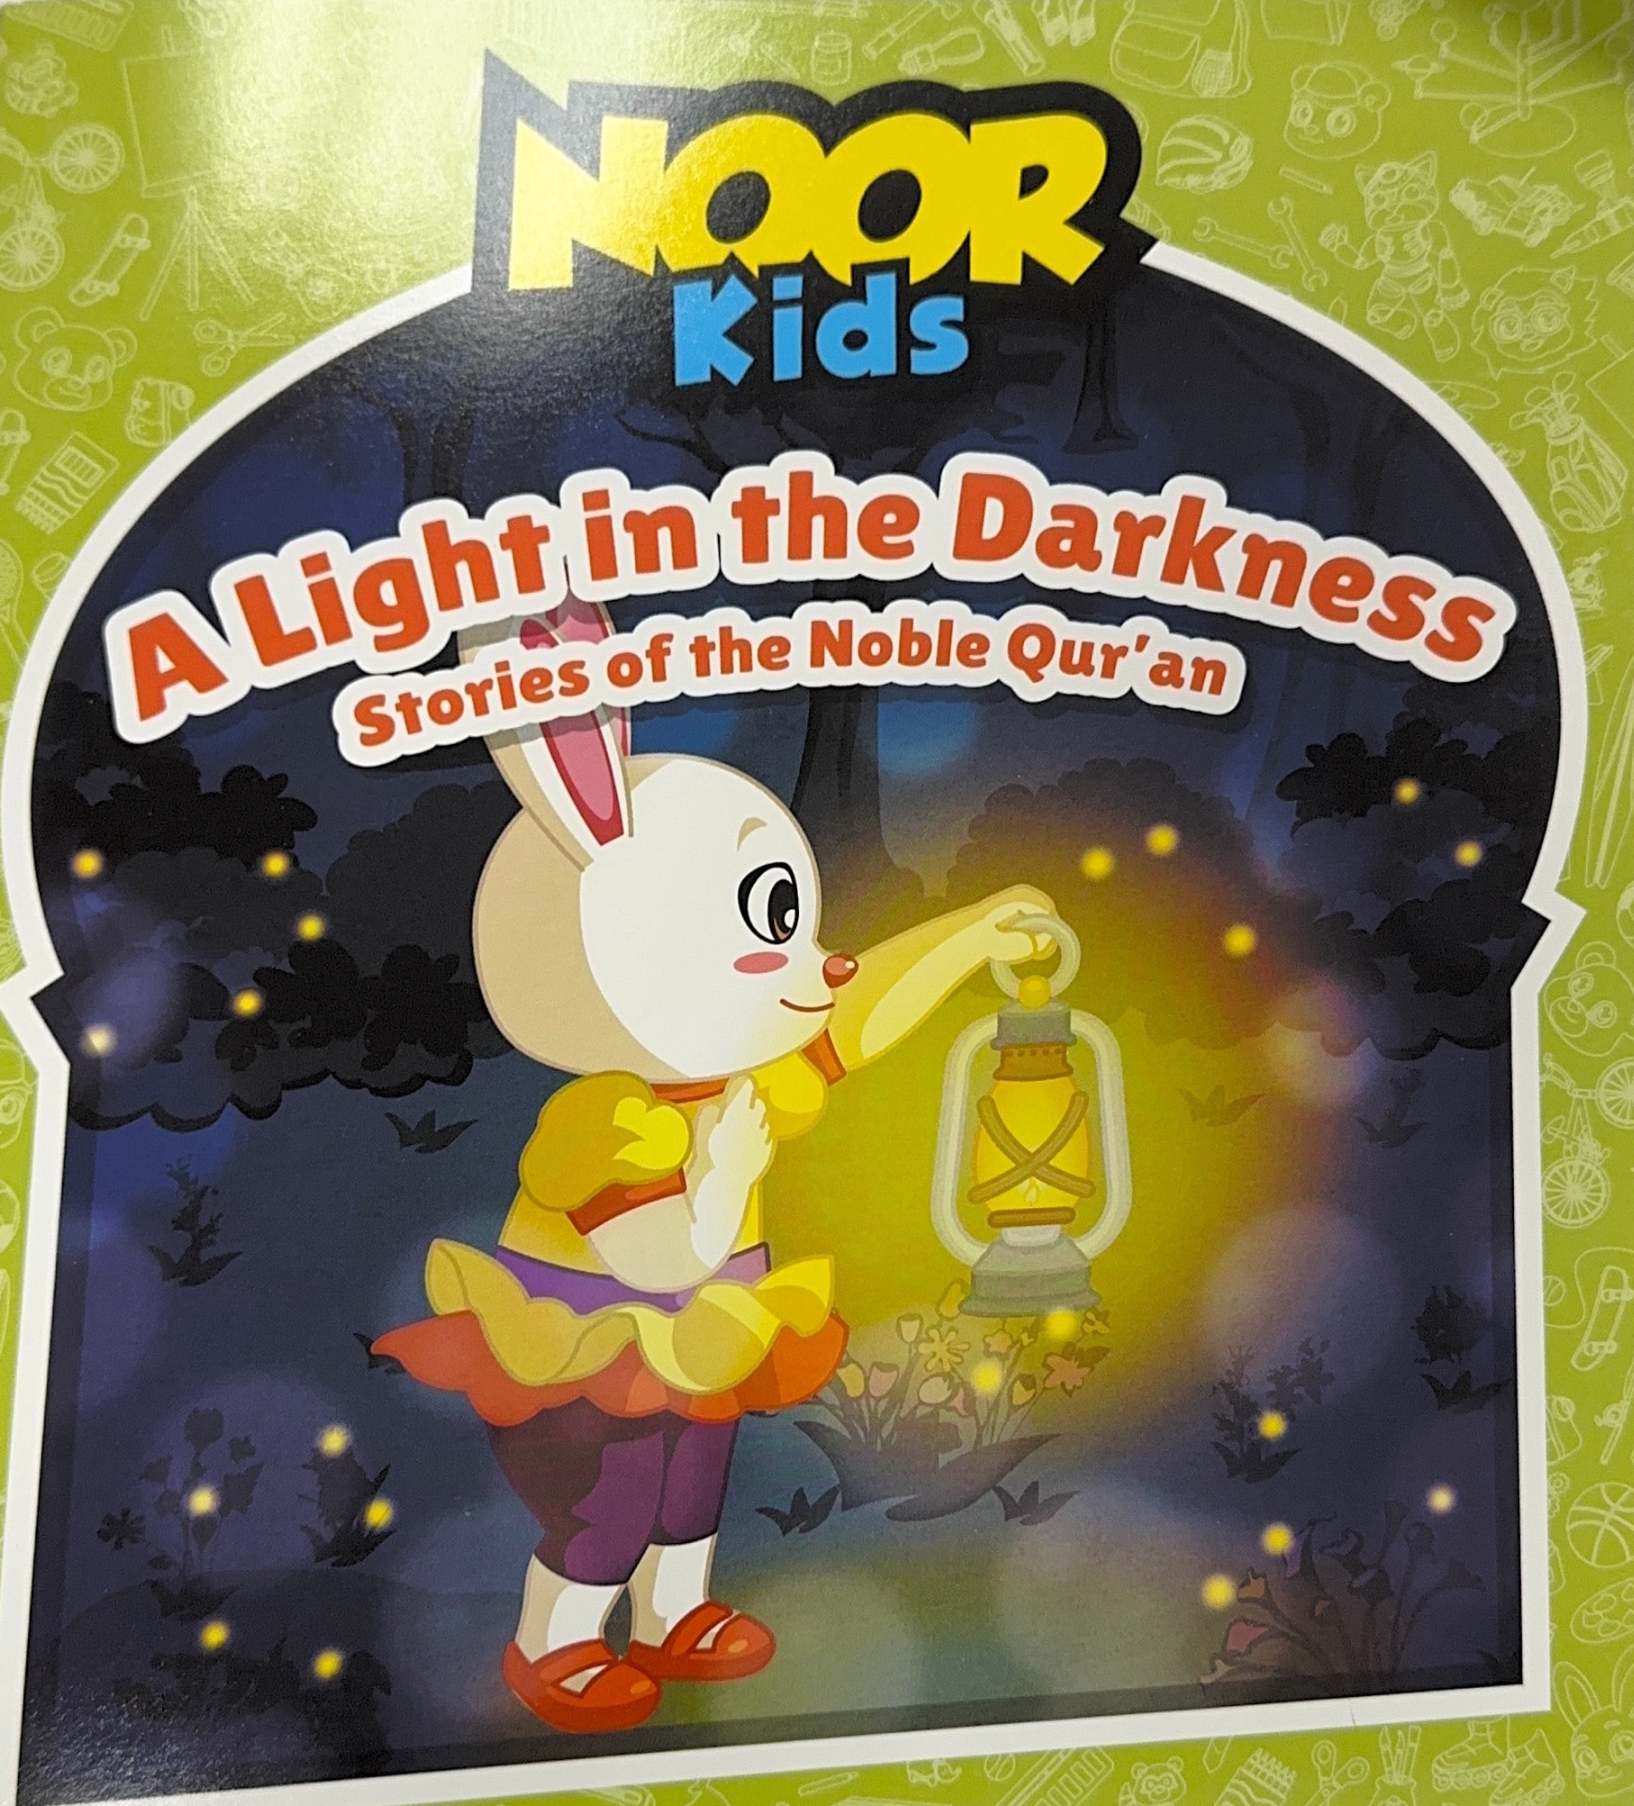 Noor Kids: A Light in the Darkness, Stories of the Noble Qur'an